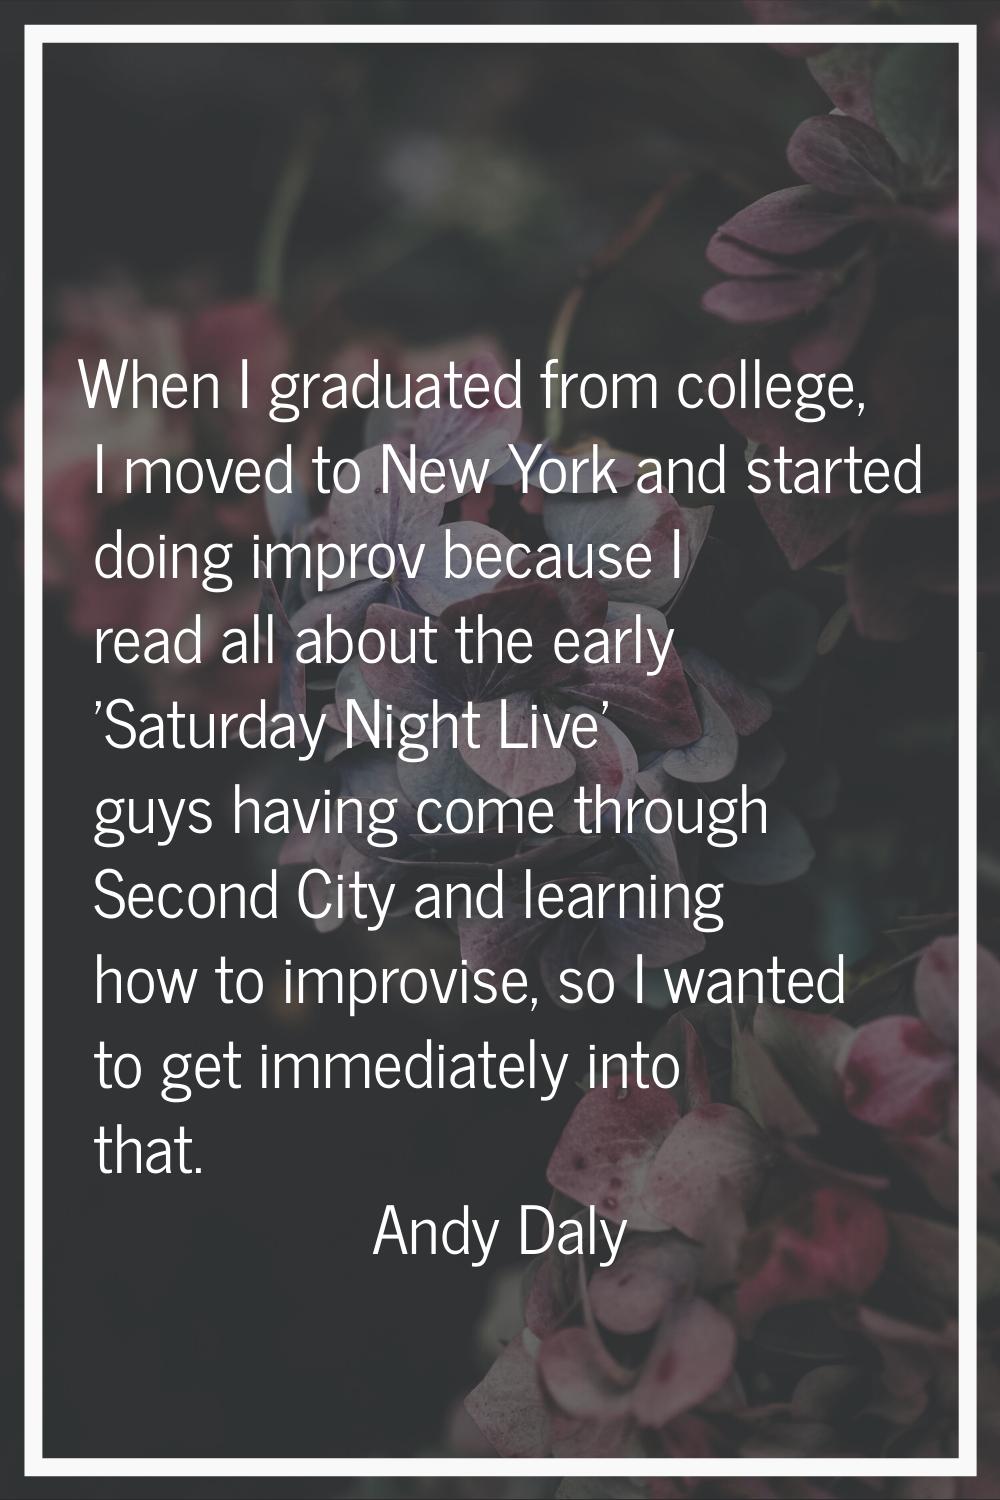 When I graduated from college, I moved to New York and started doing improv because I read all abou